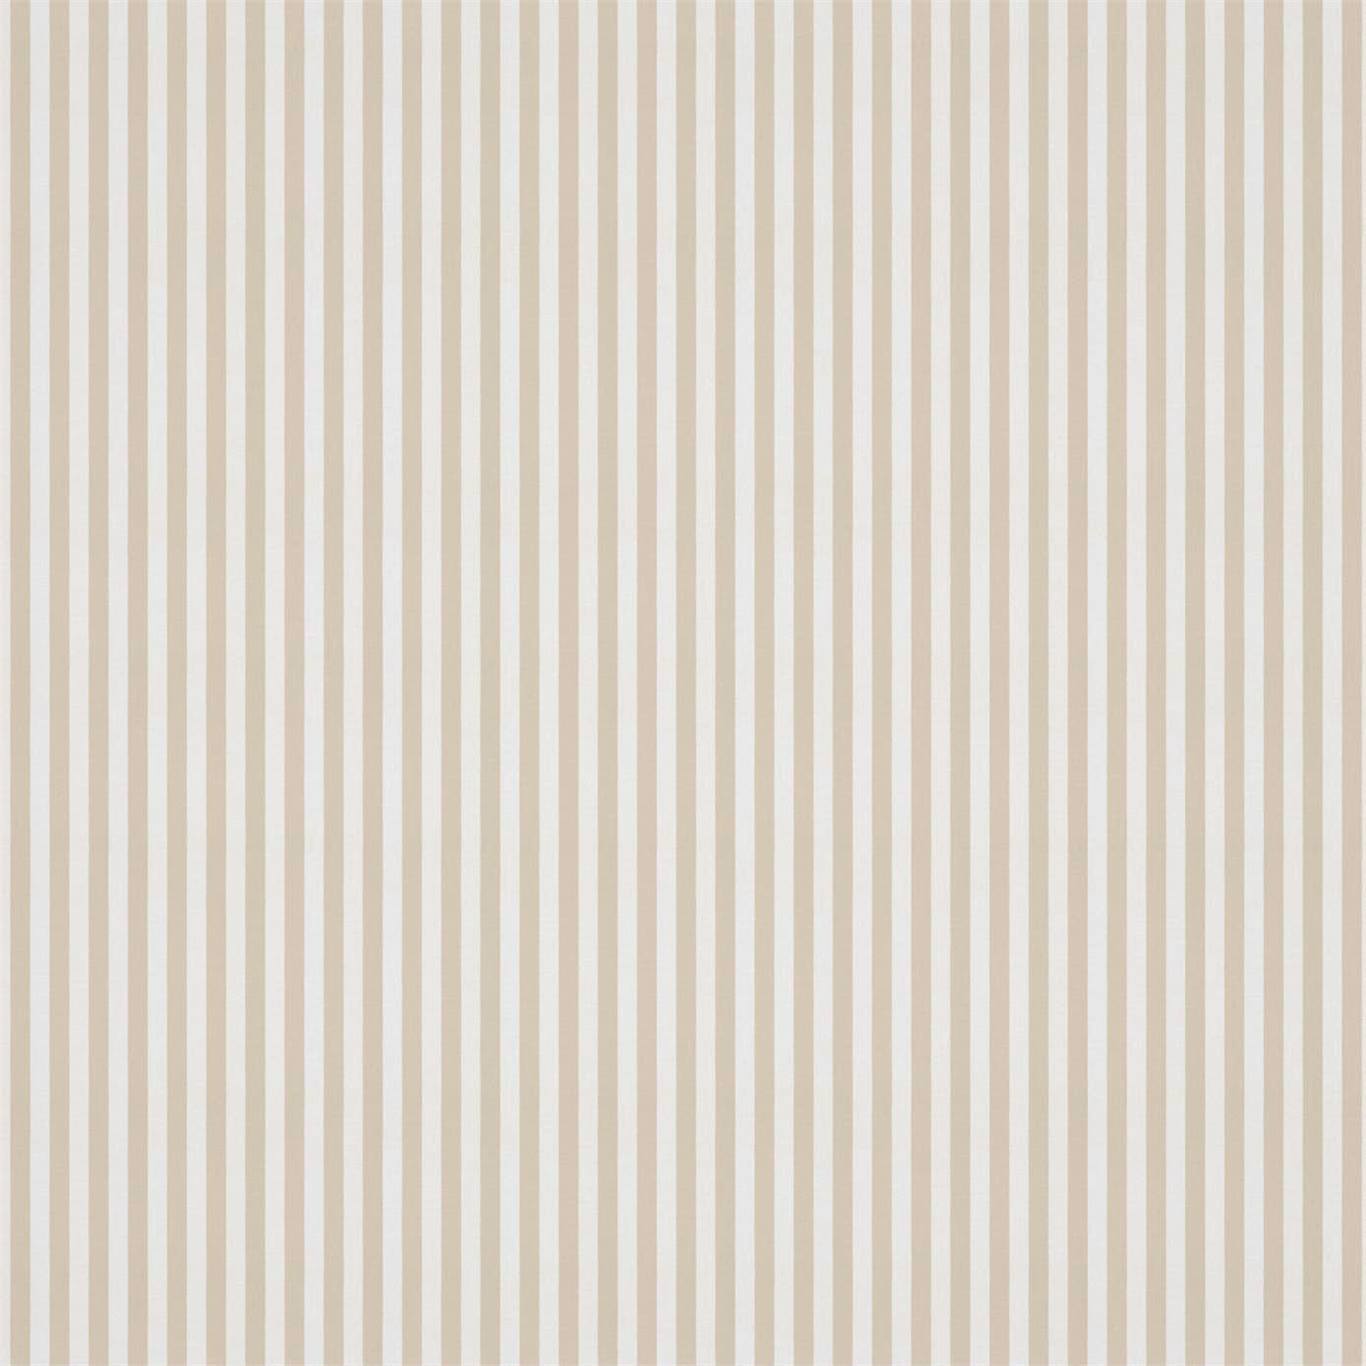 Carnival Stripe Fabric by Harlequin - HLTF133540 - Calico